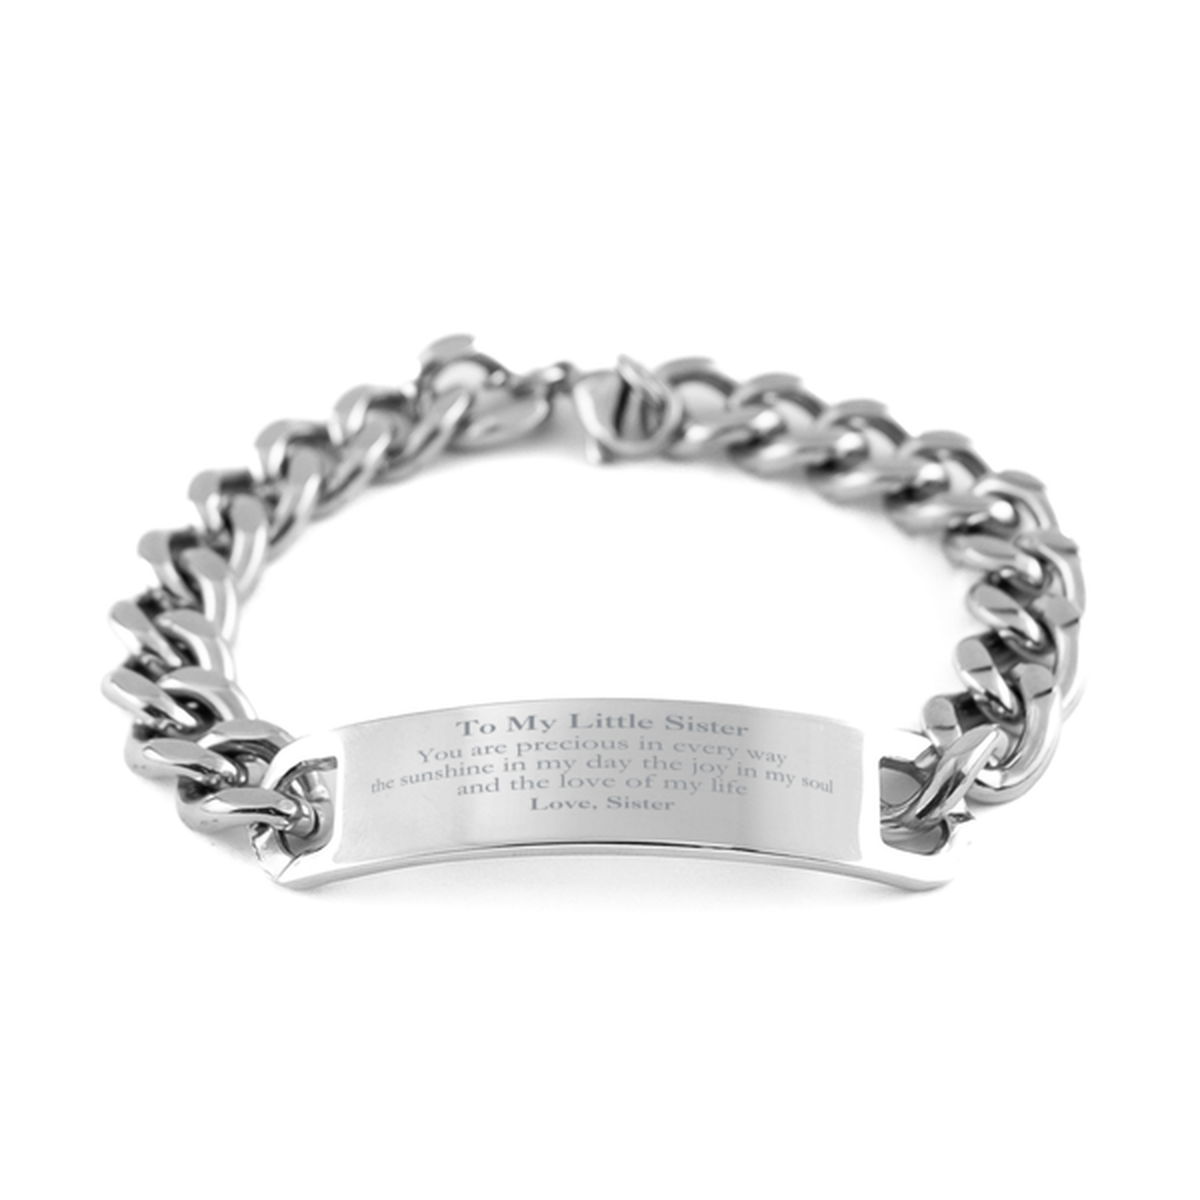 Graduation Gifts for Little Sister Cuban Chain Stainless Steel Bracelet Present from Sister, Christmas Little Sister Birthday Gifts Little Sister You are precious in every way the sunshine in my day. Love, Sister